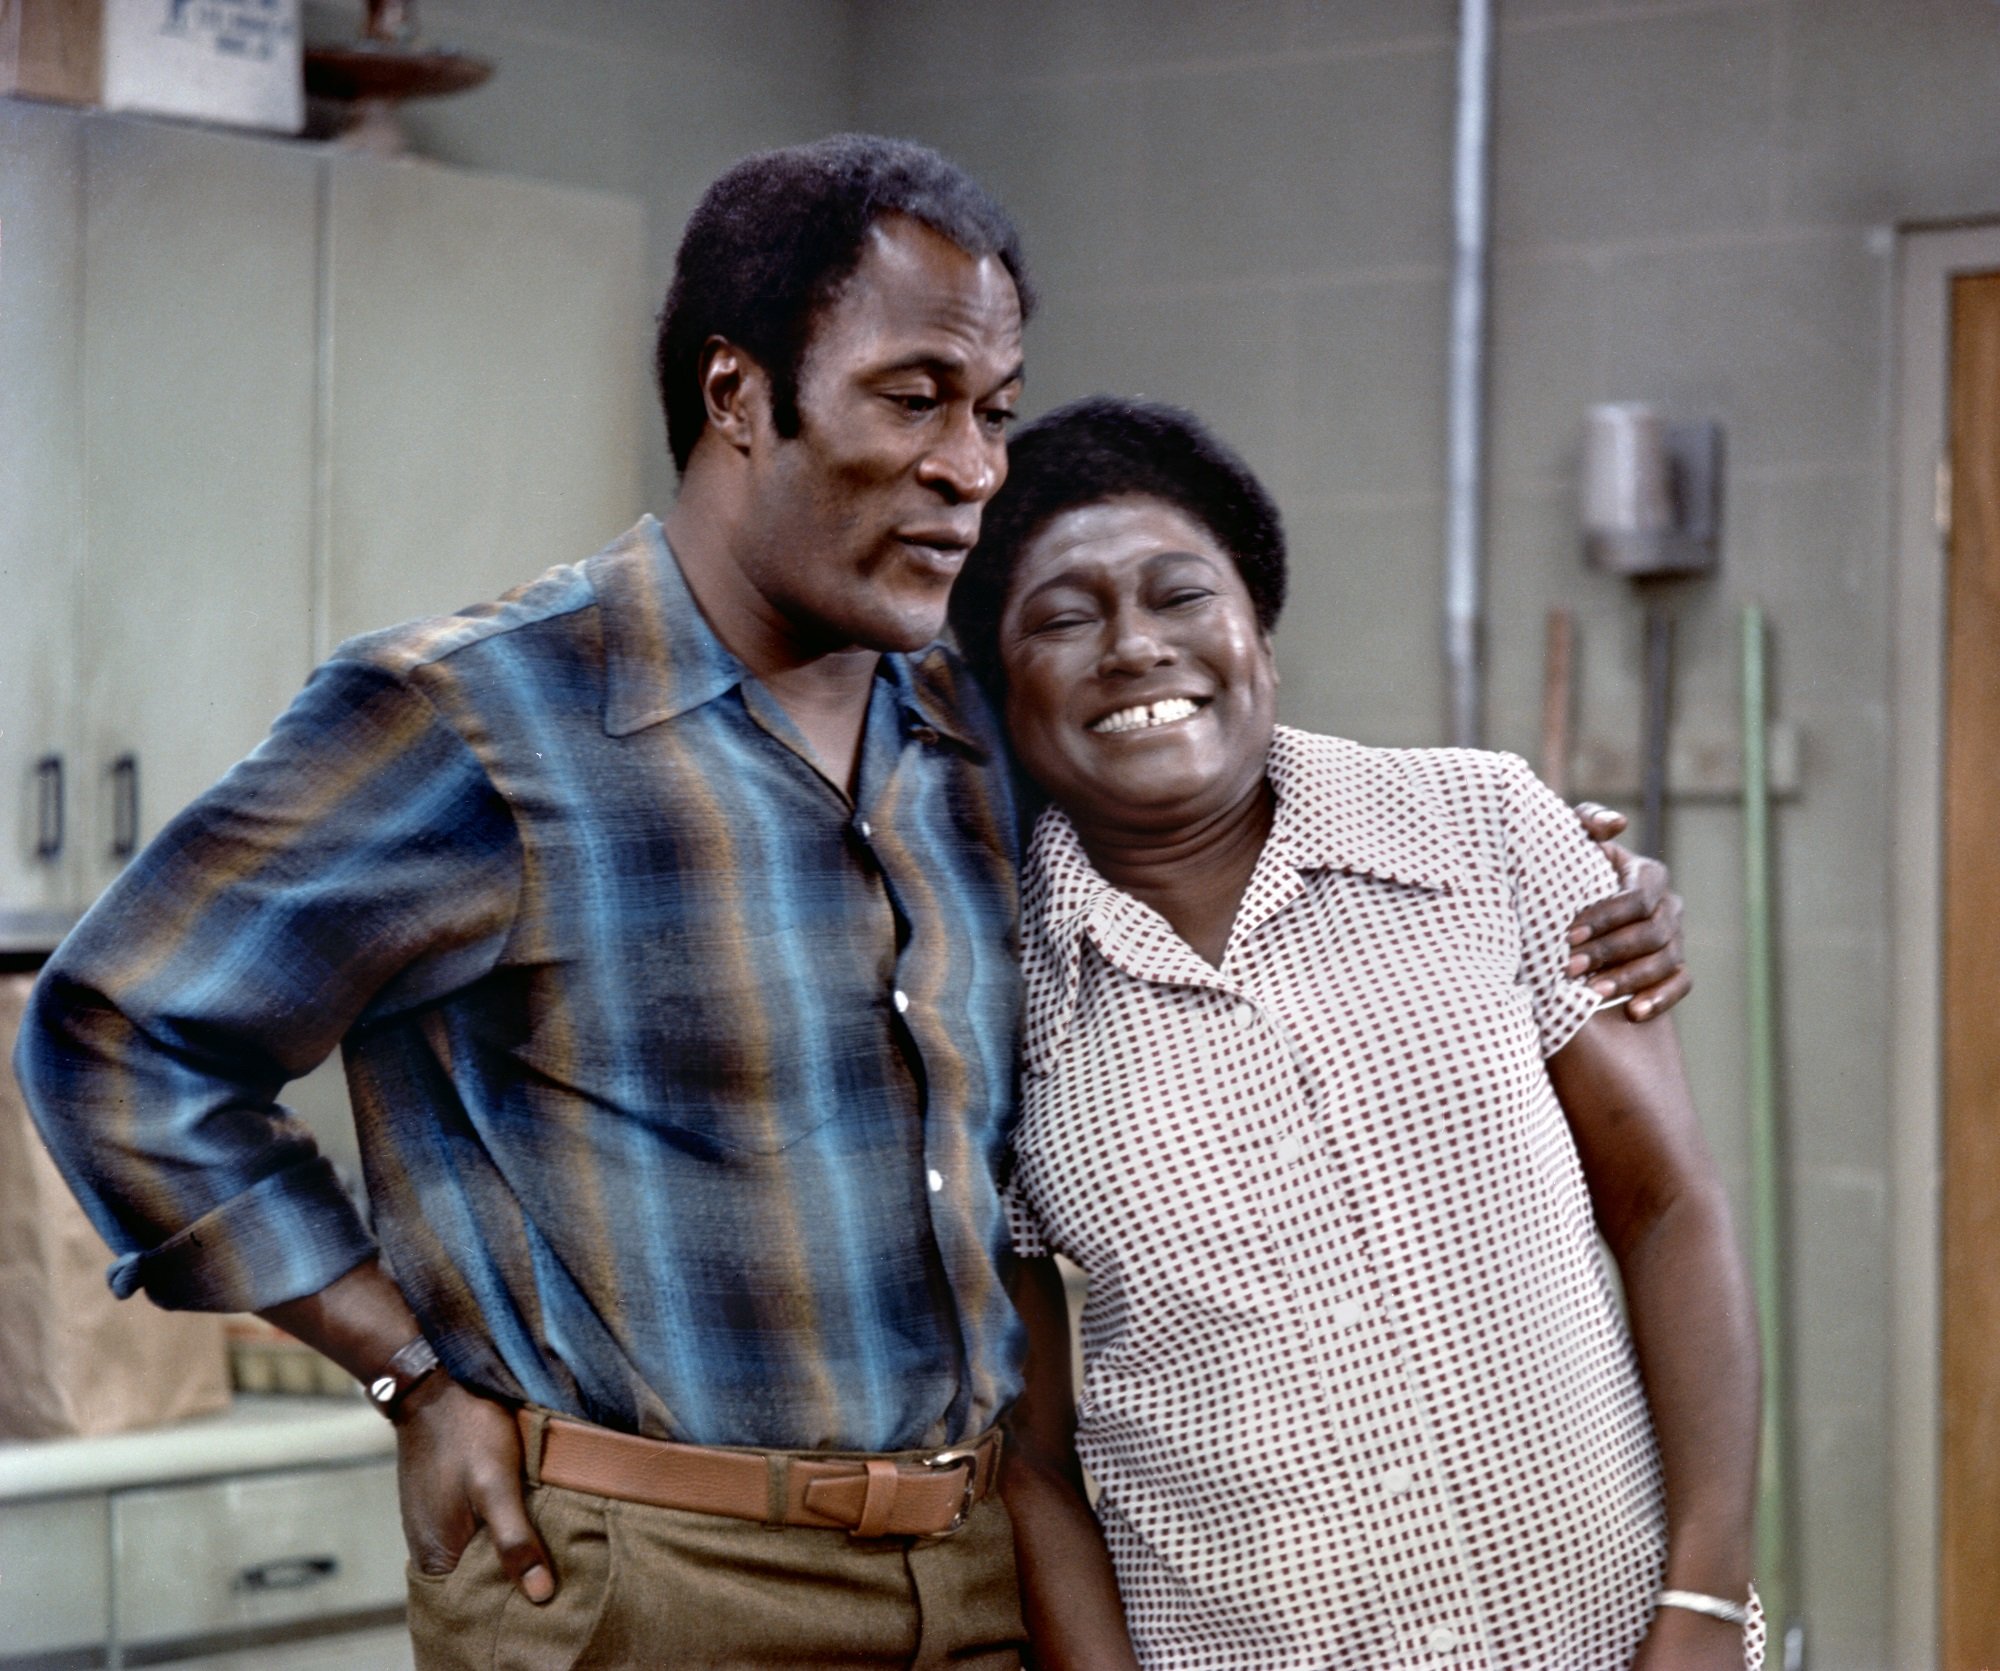 Good Times star John Amos with his arm around co-star Esther Rolle